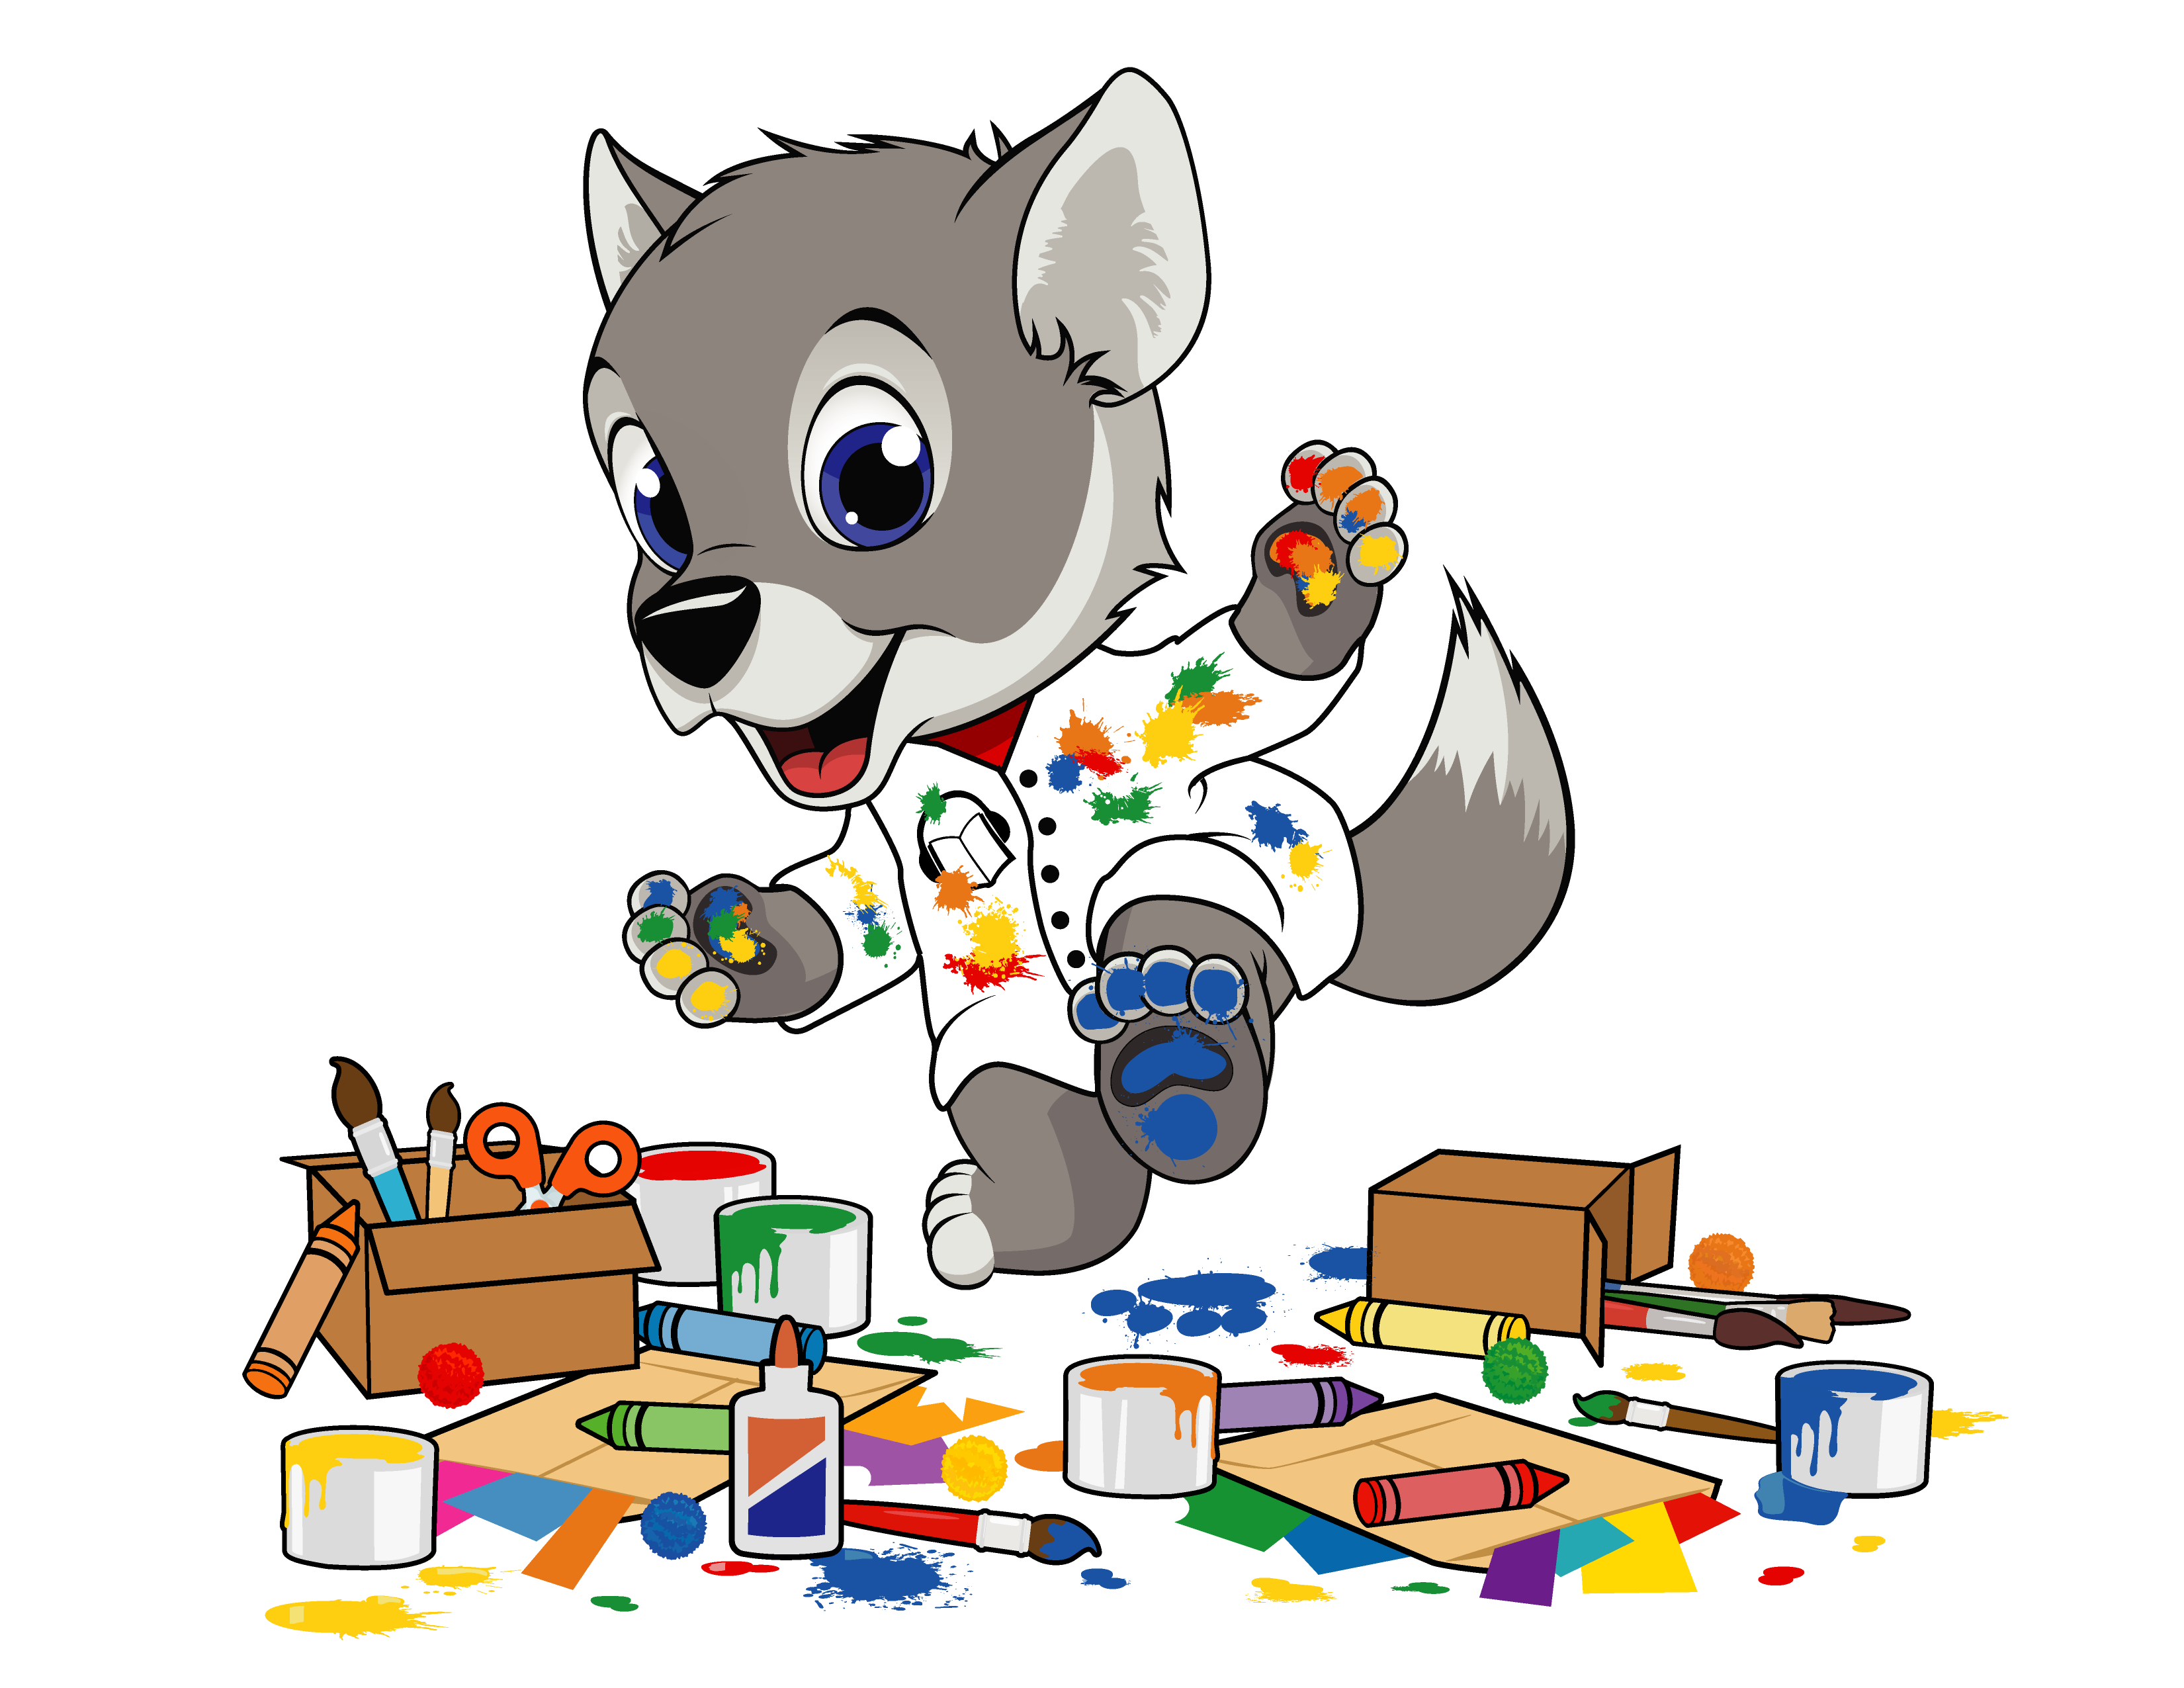 Wolfie dressed in a white smock, with paint on his paws and craft supplies covering over the floor and coming out of boxes and envelopes